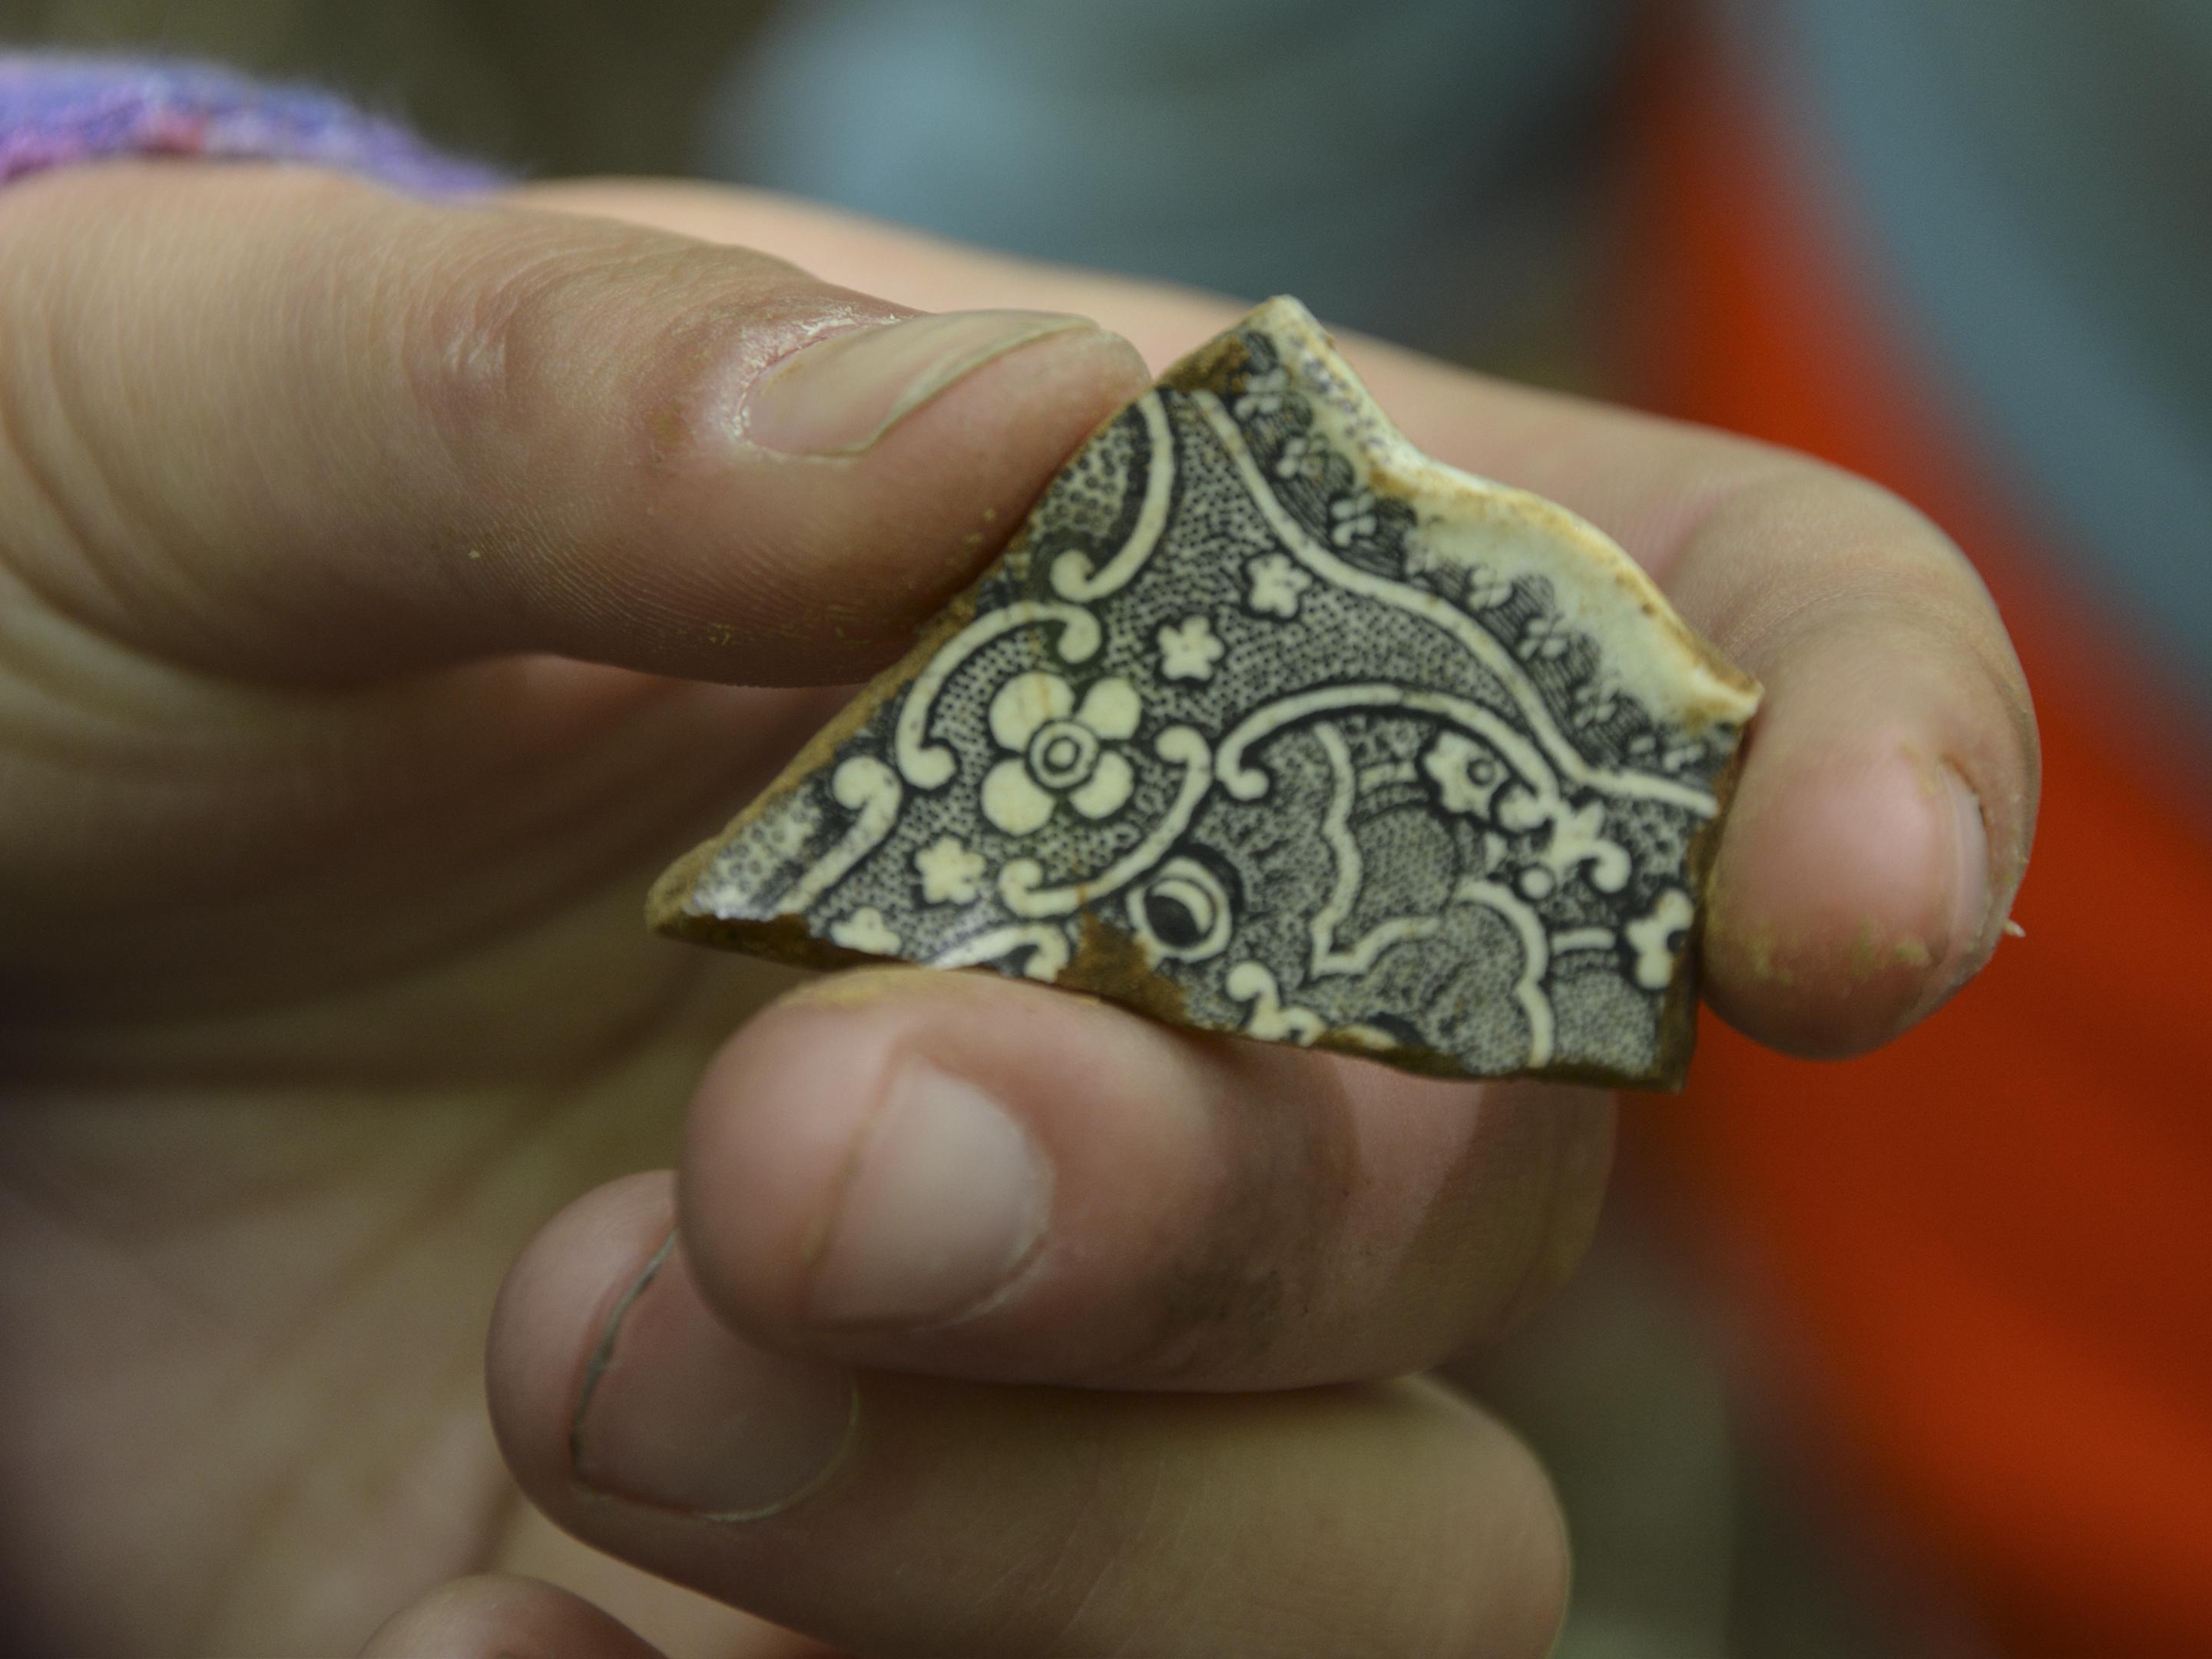 A fragment of a clay pot, intricately decorated with black line drawings.